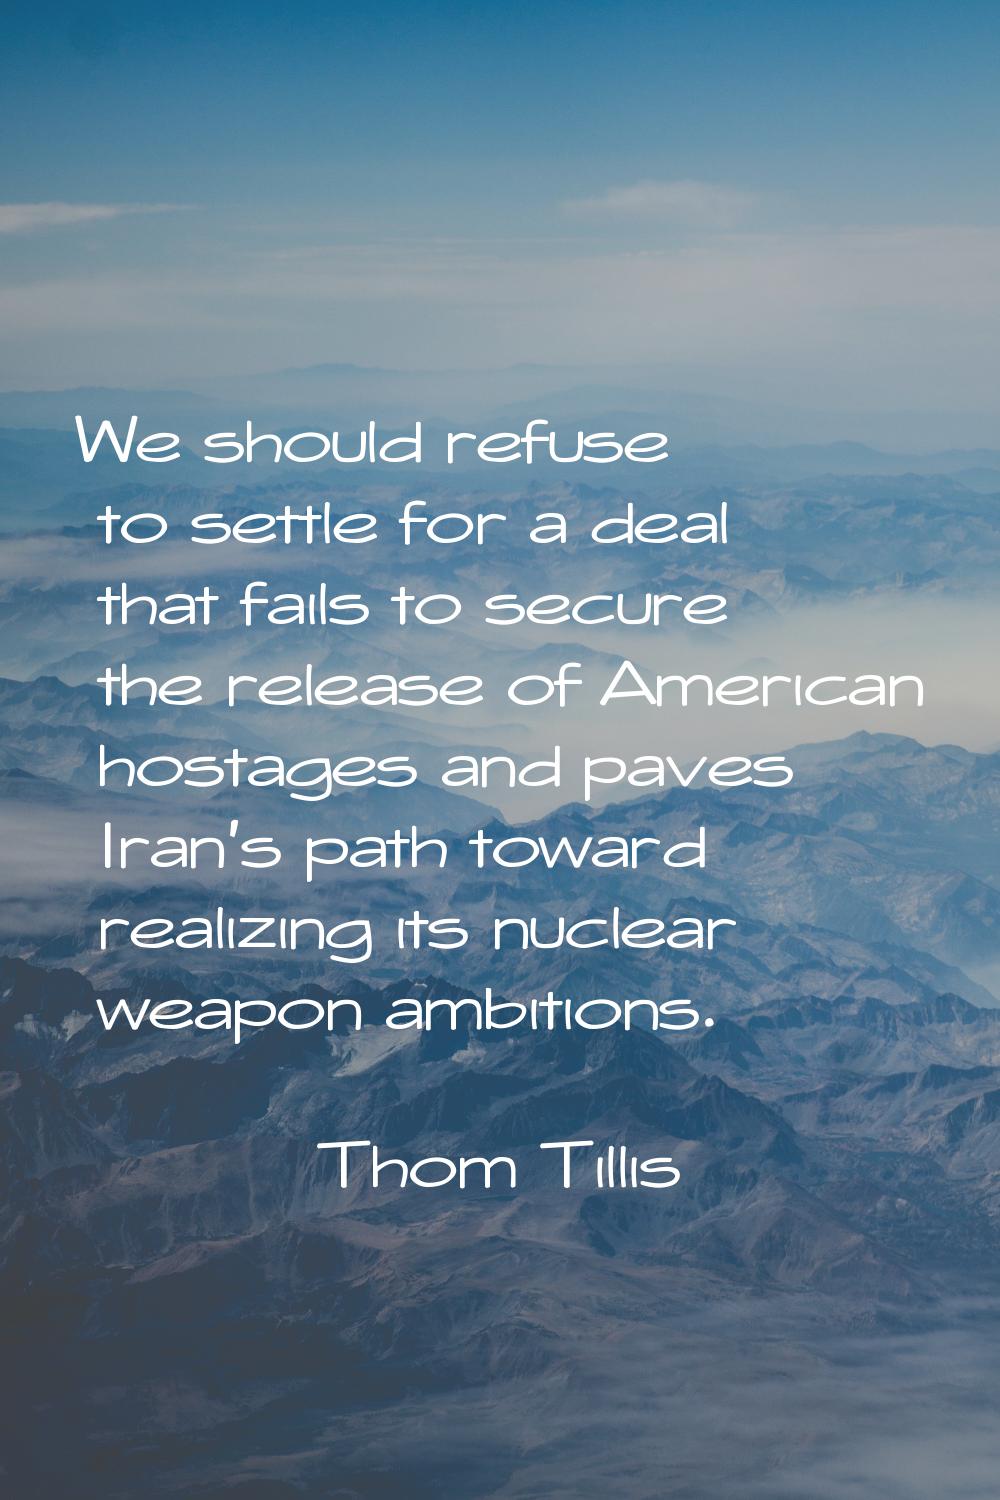 We should refuse to settle for a deal that fails to secure the release of American hostages and pav